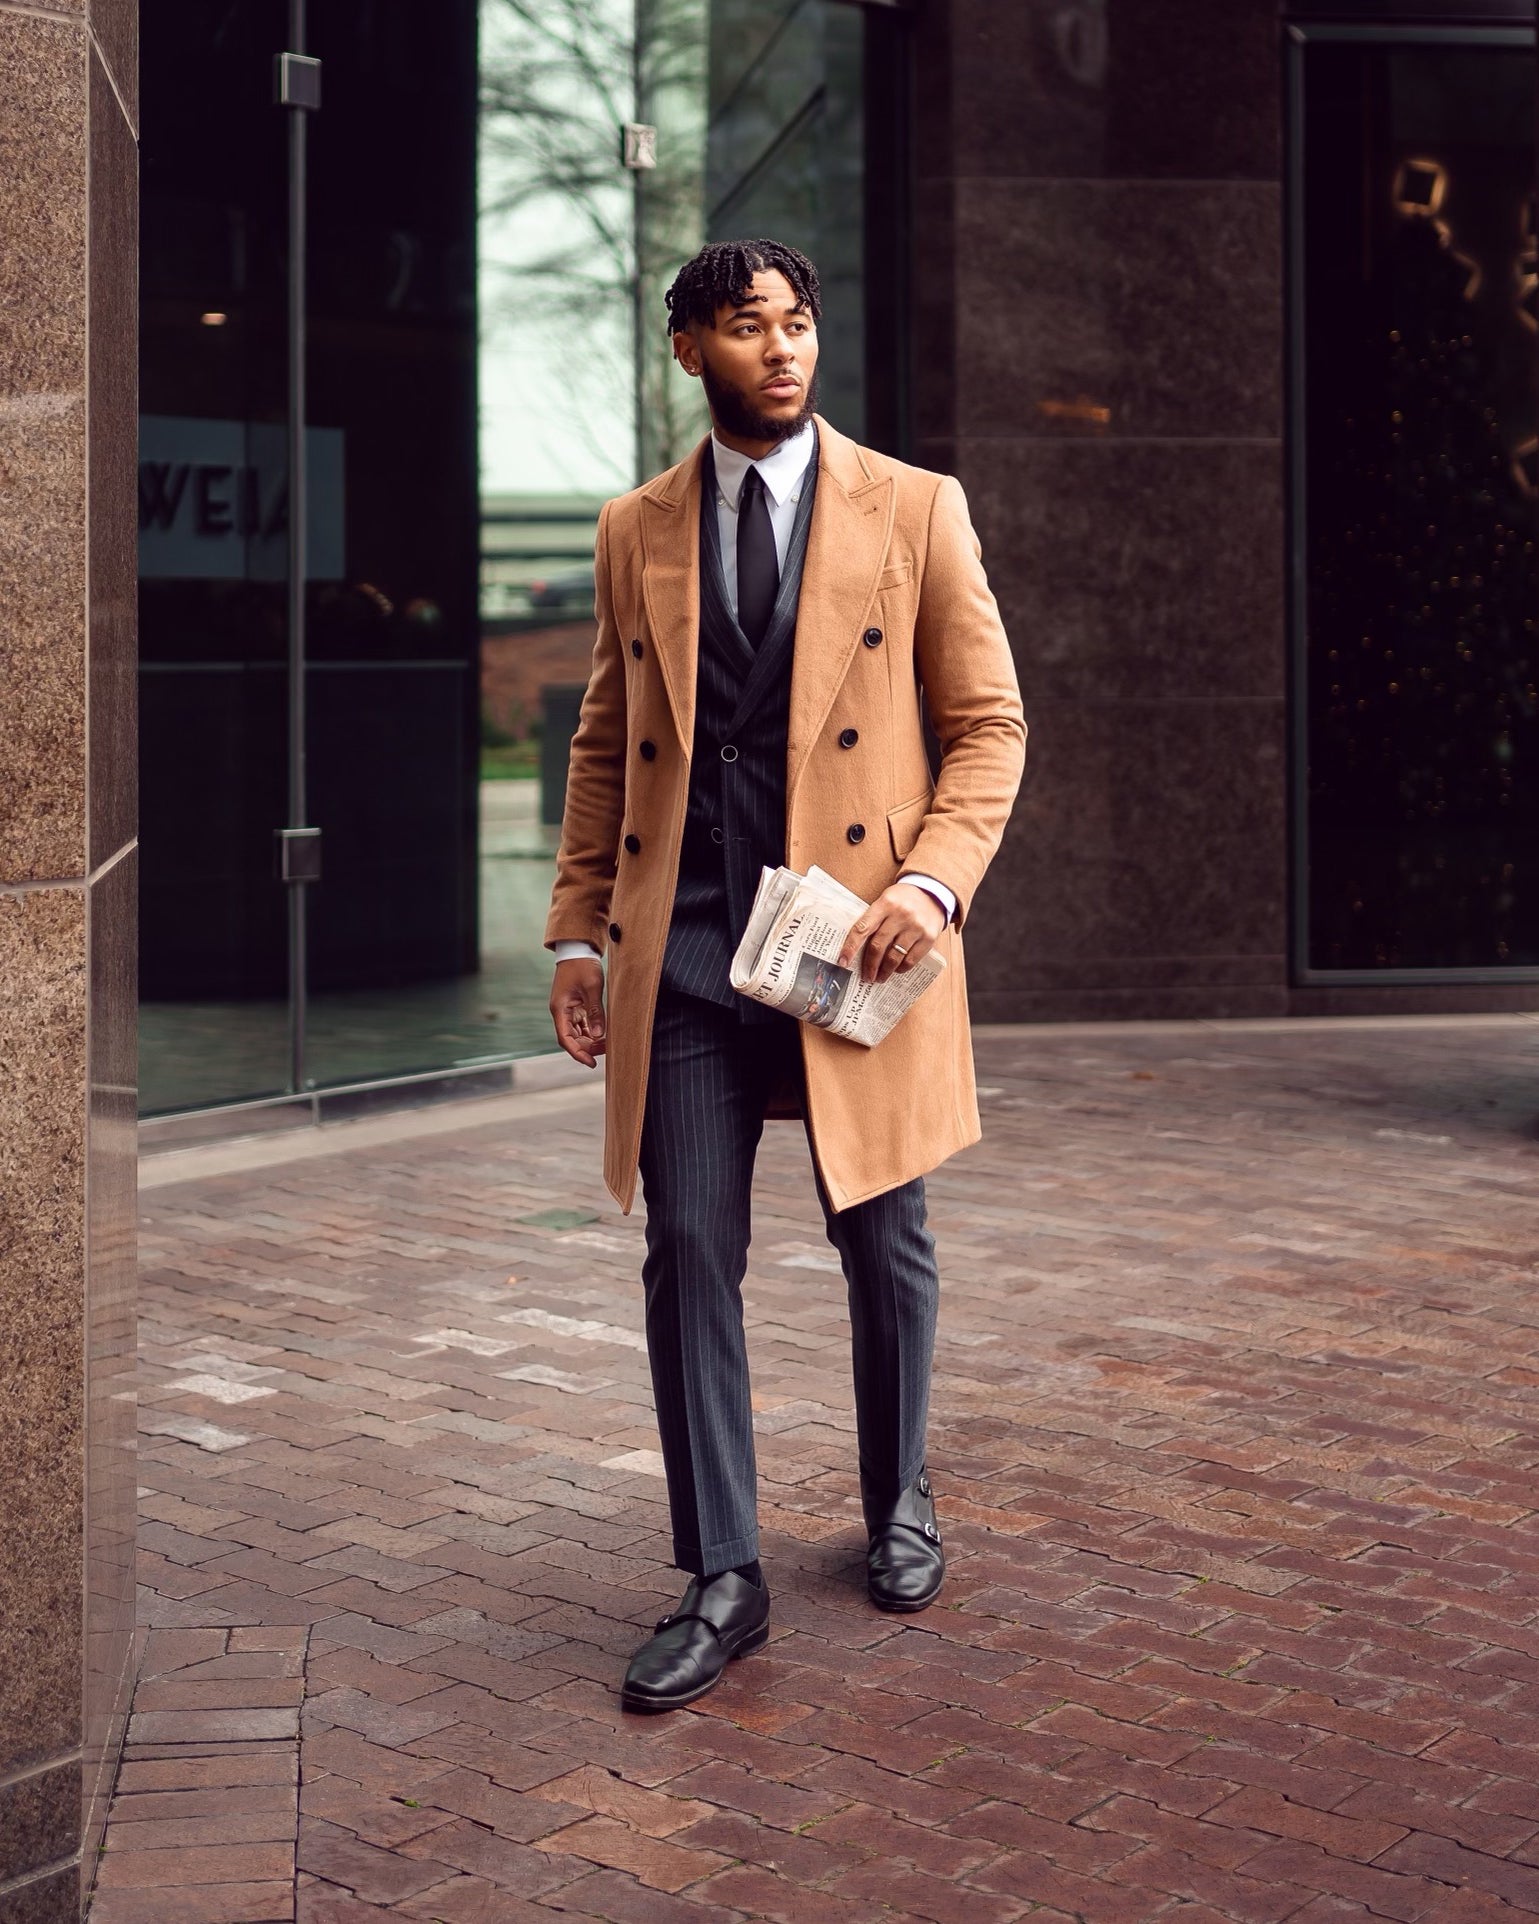 Brown Long Wide lapel Double-Breasted Coat